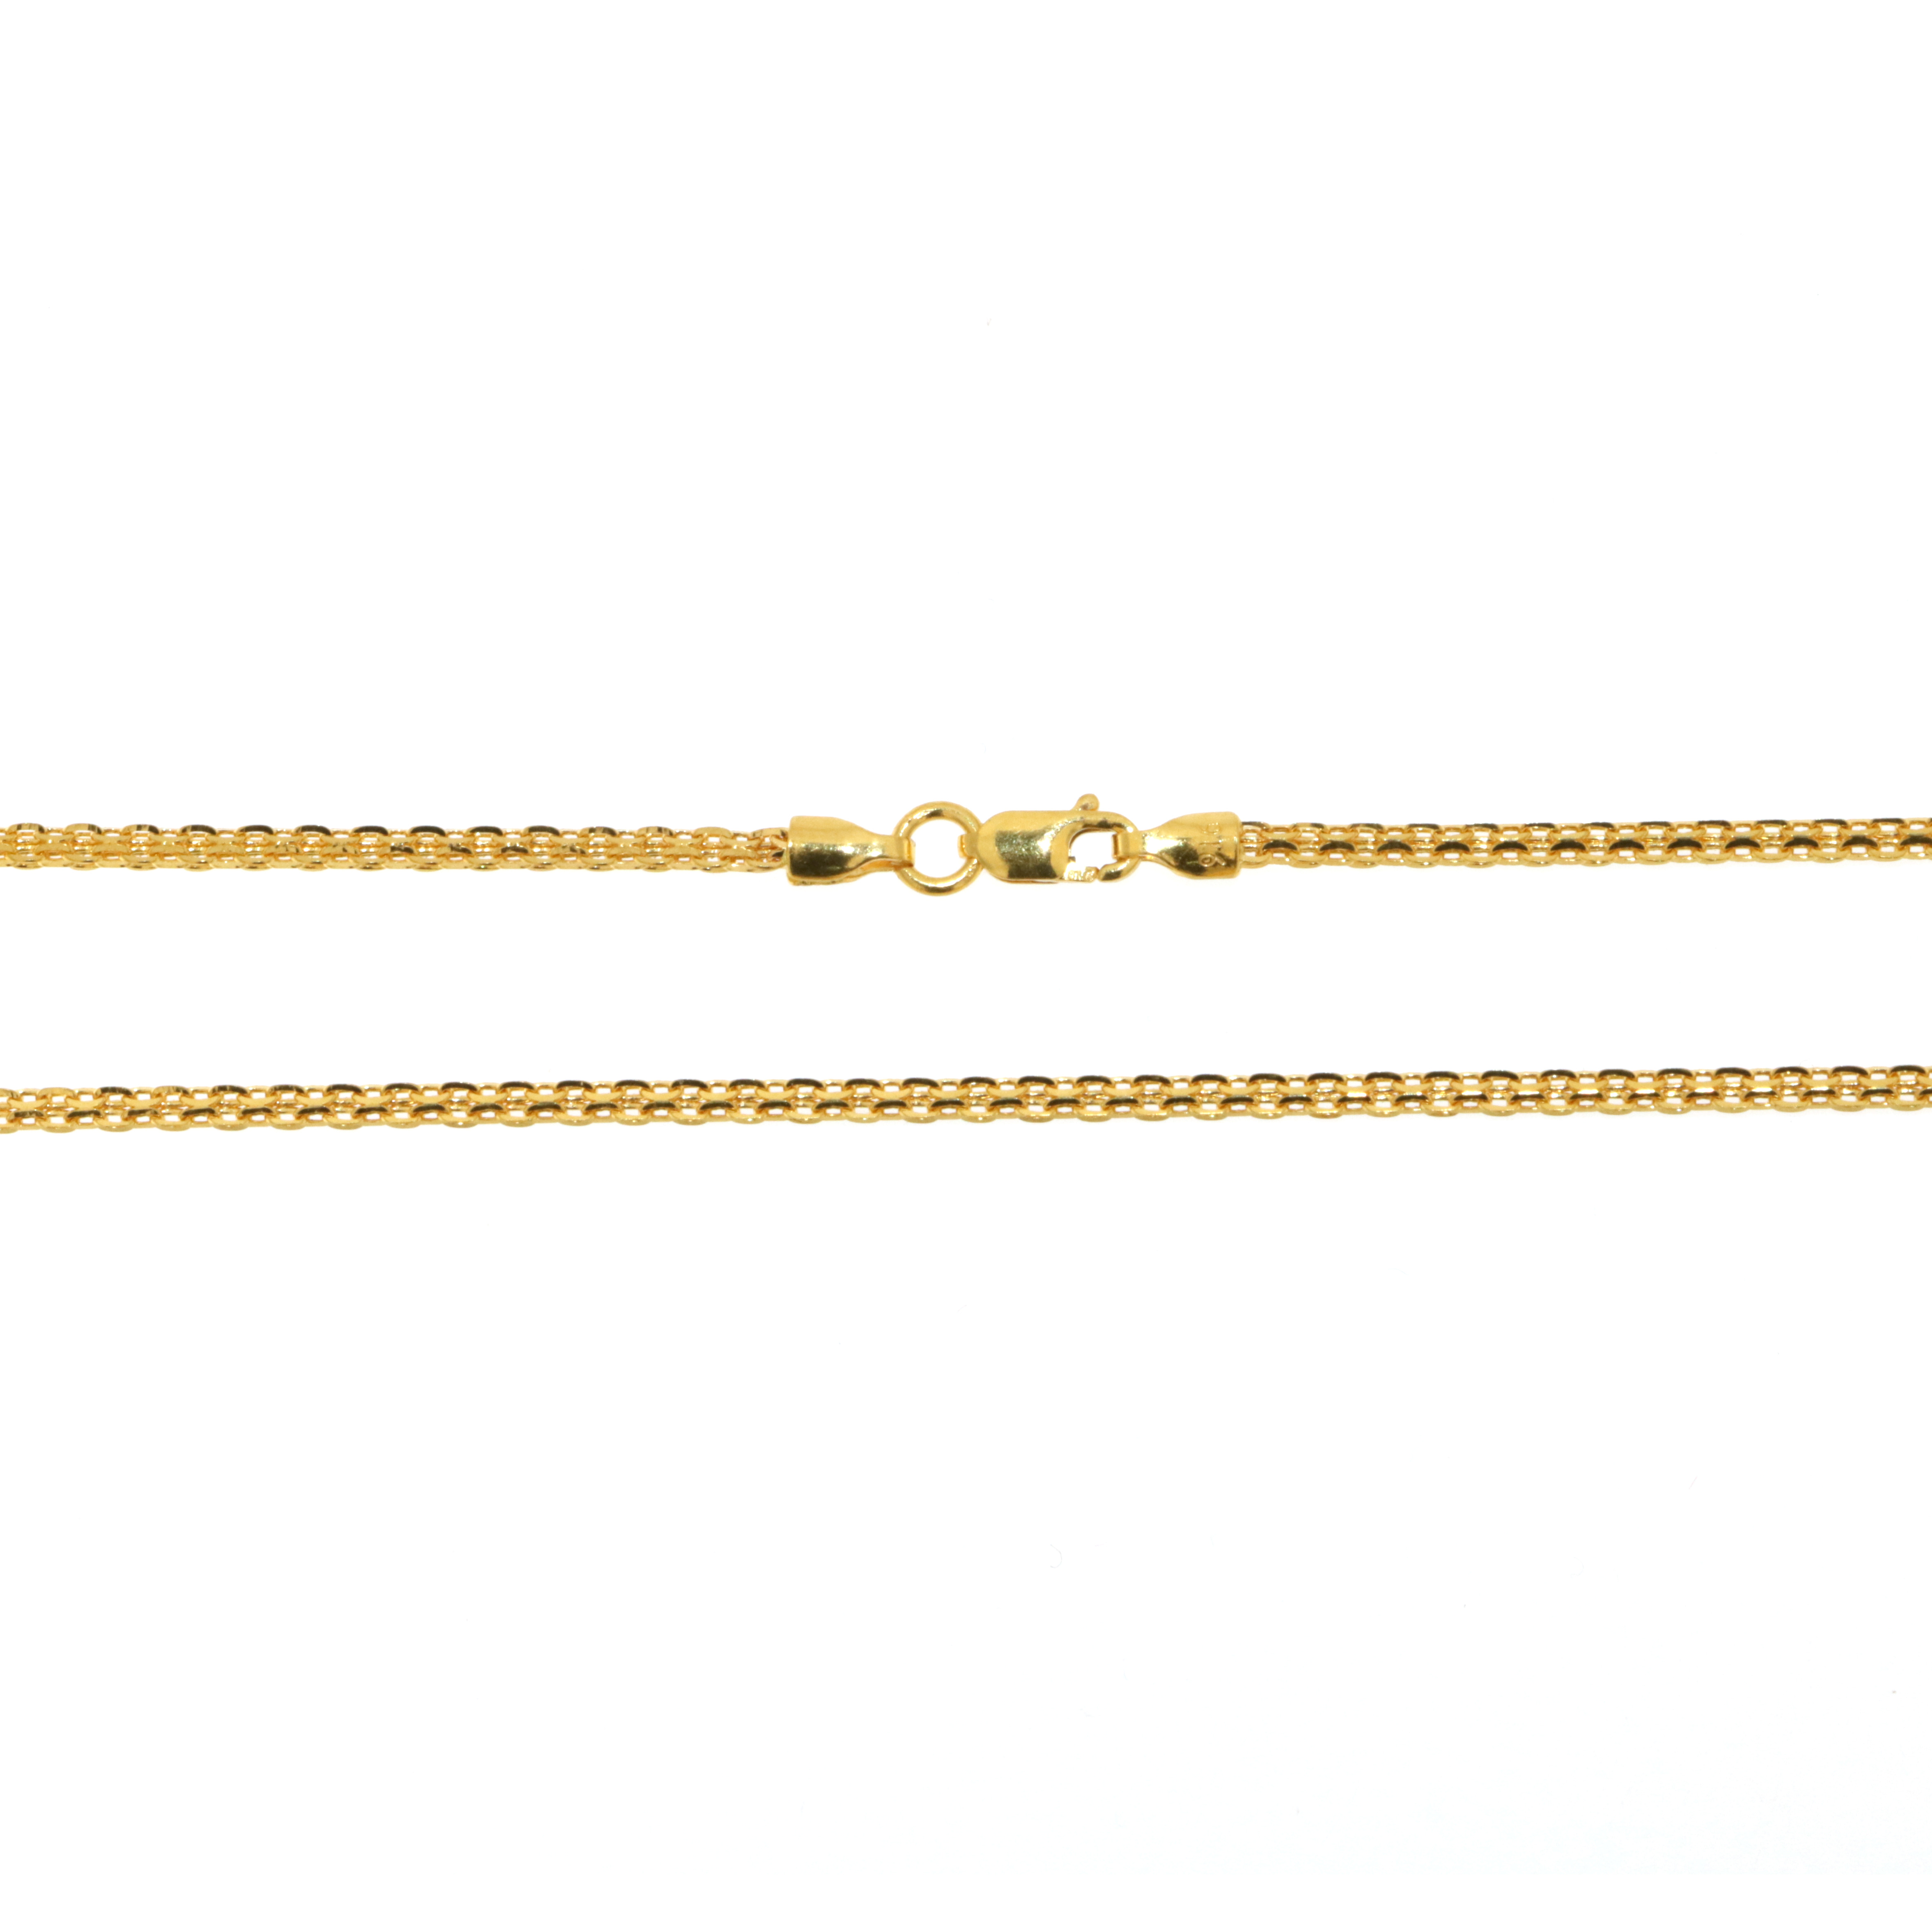 22ct Real Gold Asian/Indian/Pakistani Style Chain